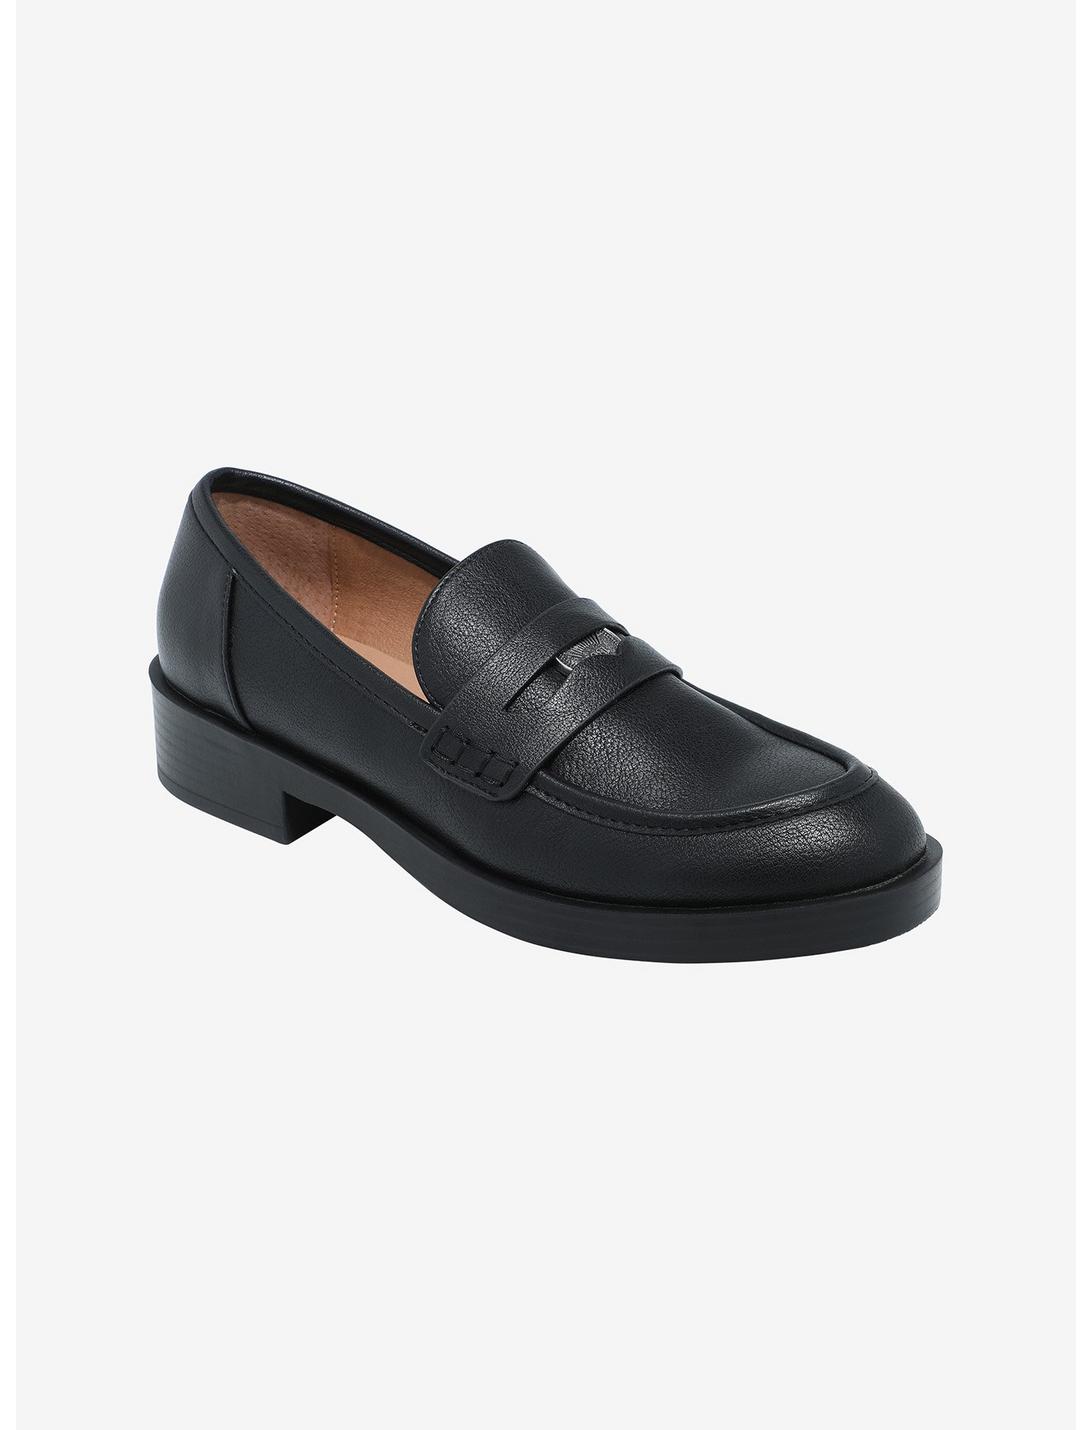 Chinese Laundry Chain Loafer Mules, MULTI, hi-res